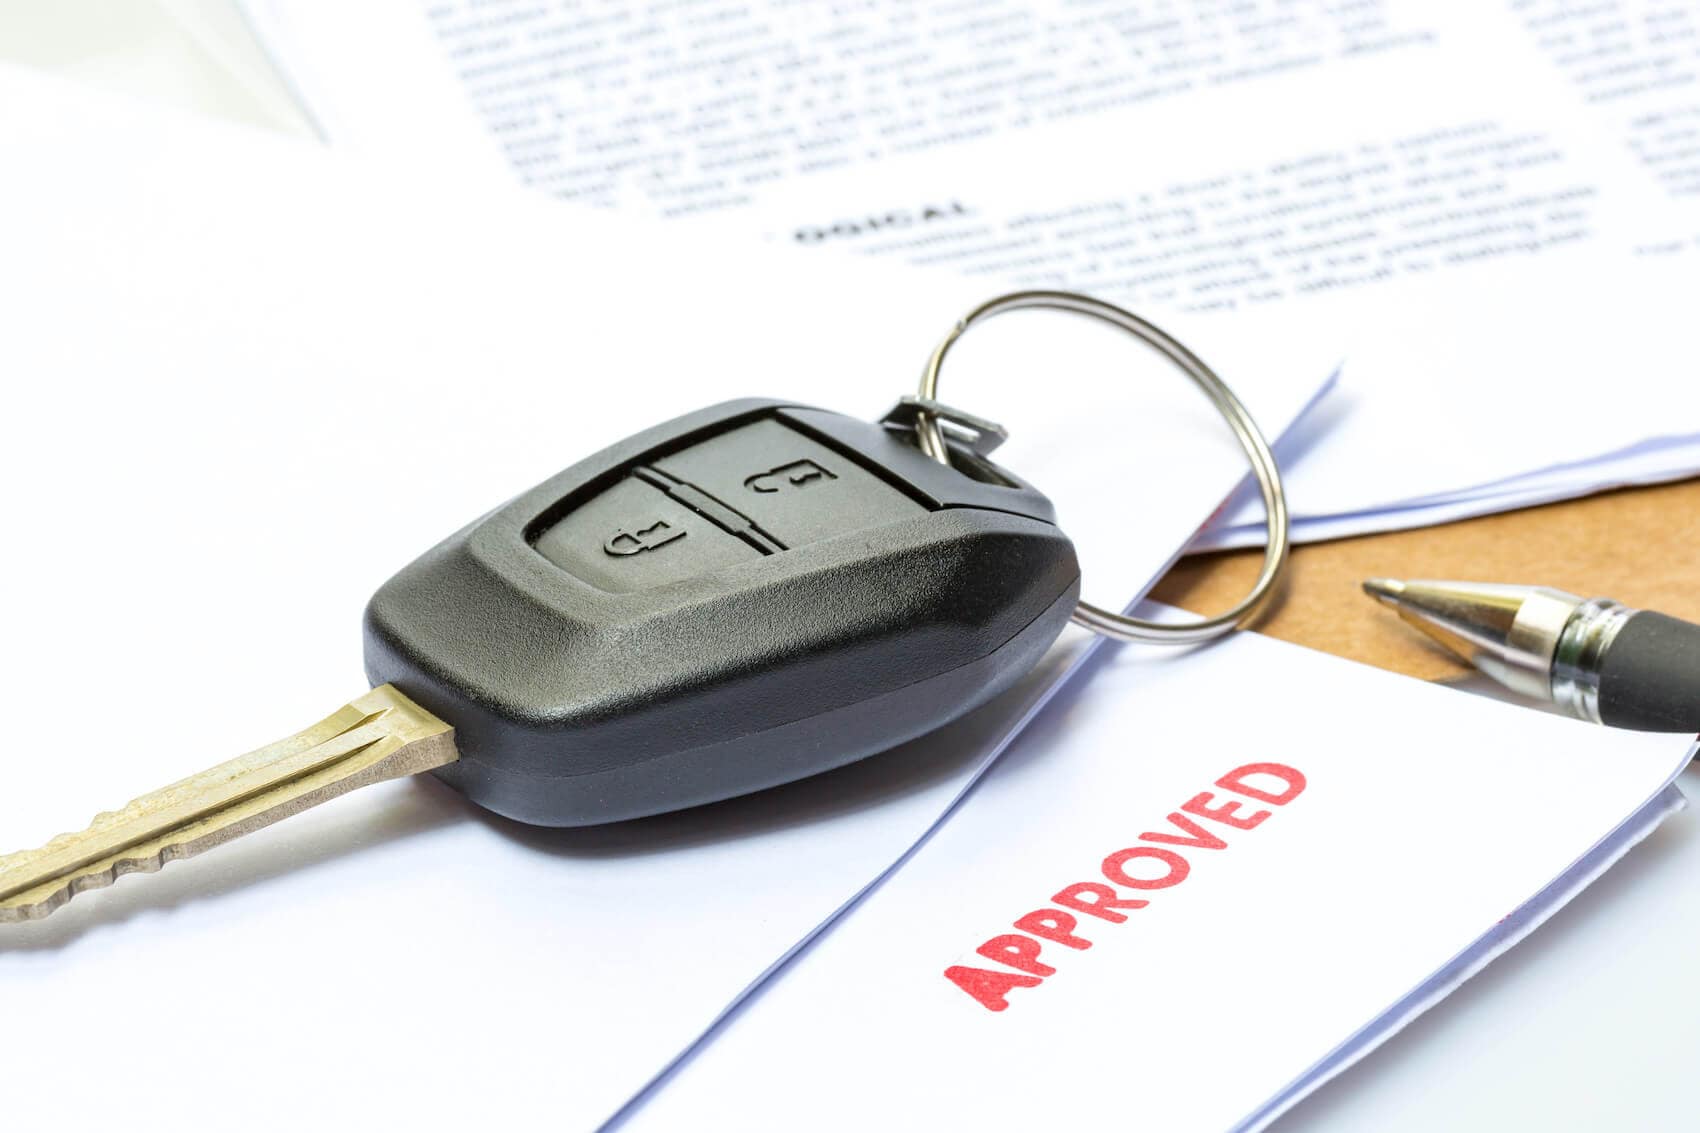 image of a car key on a stack of papers that say 'Approve'